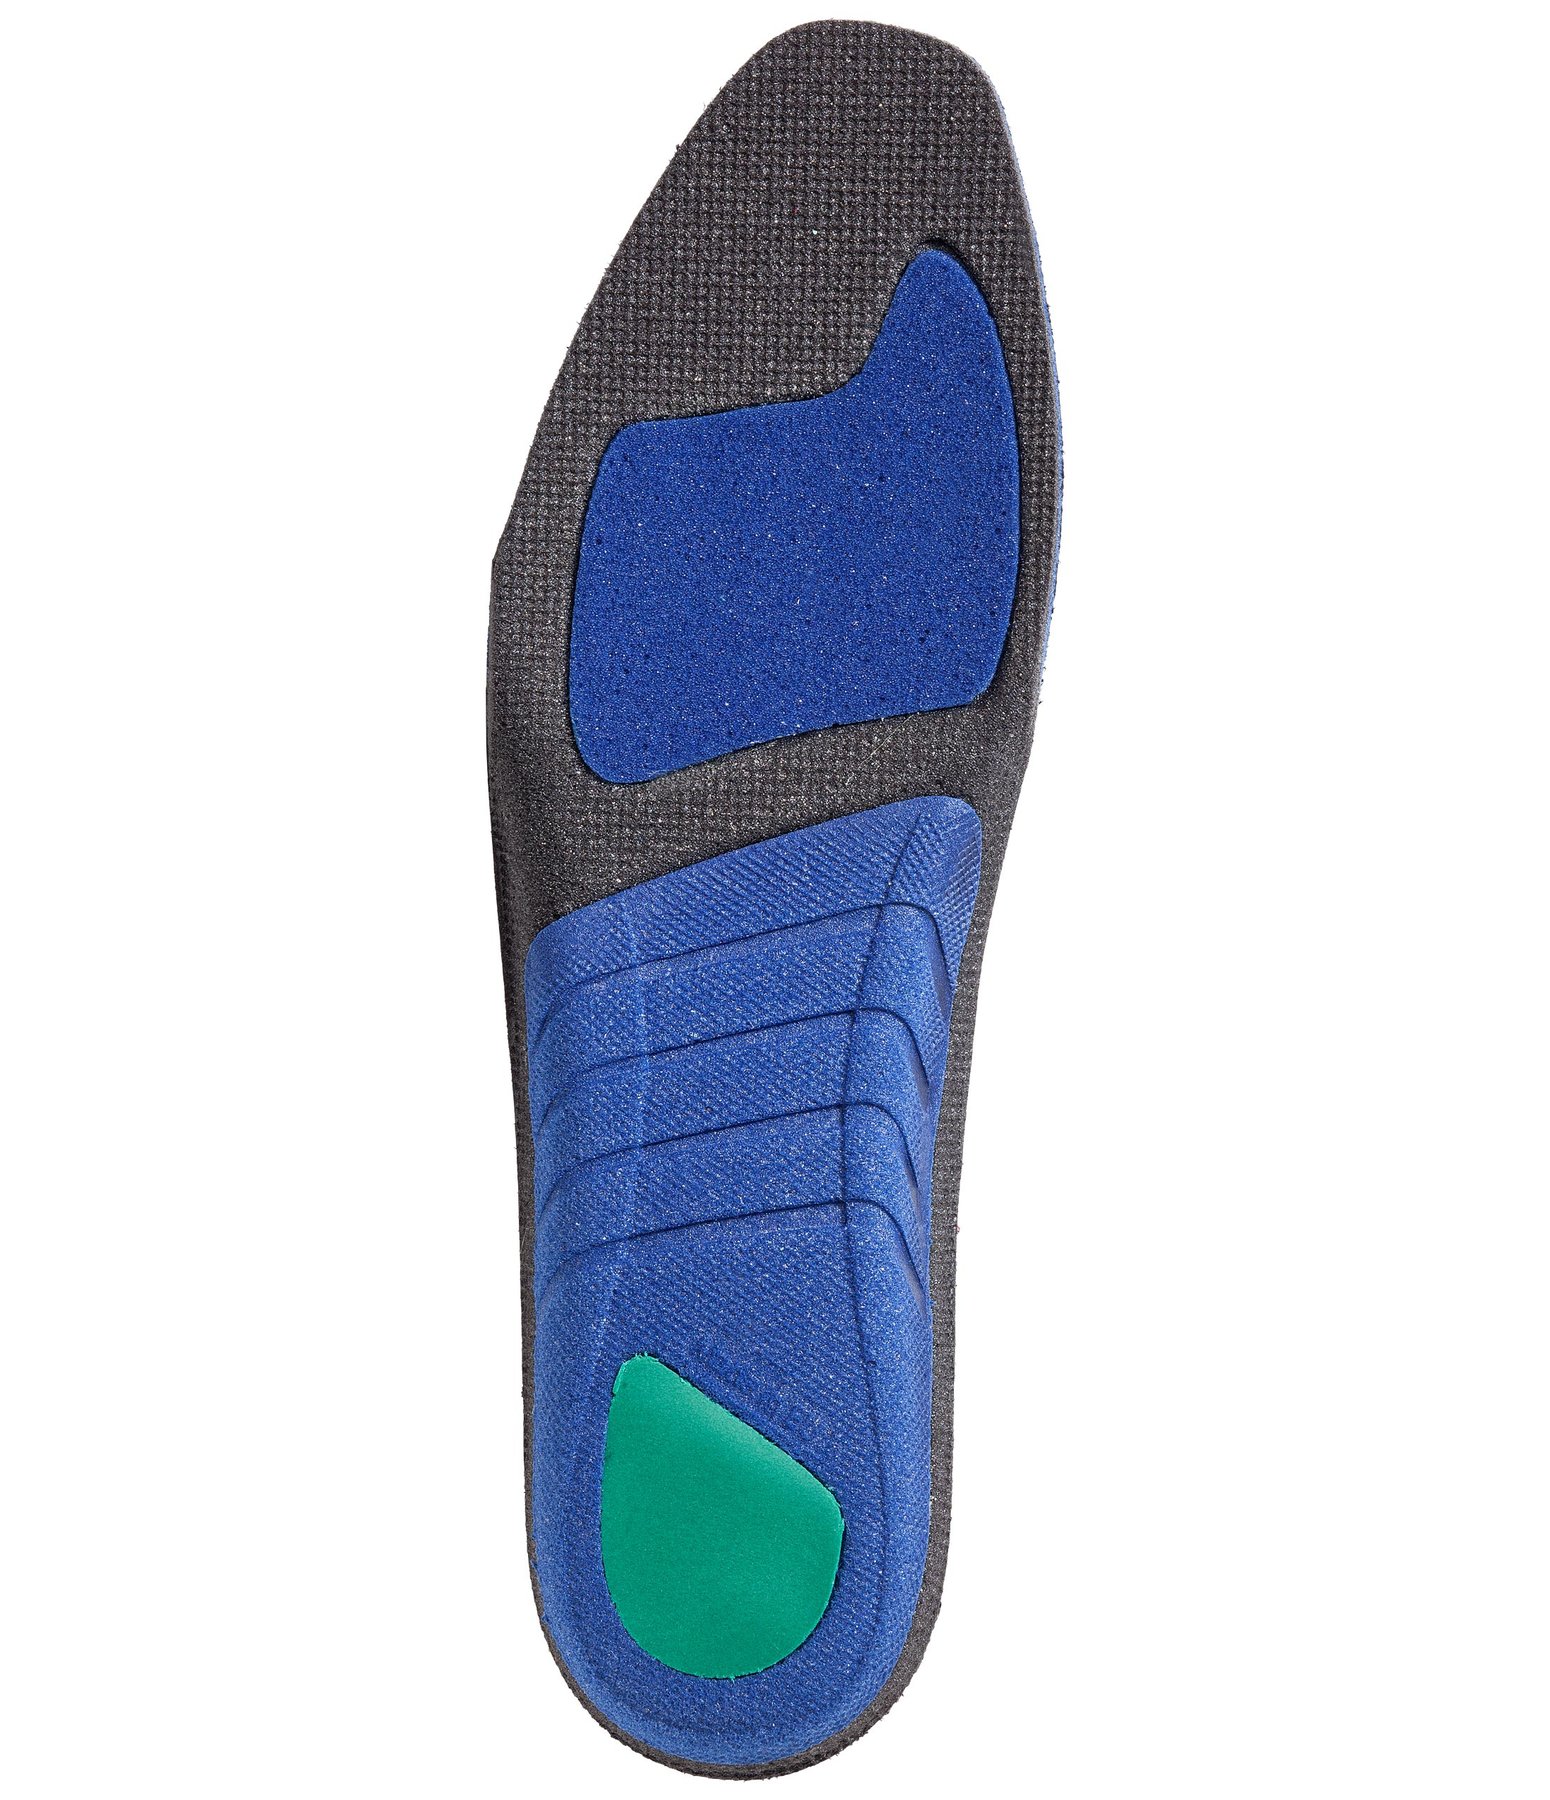 Soletta Comfort Footbed Technology